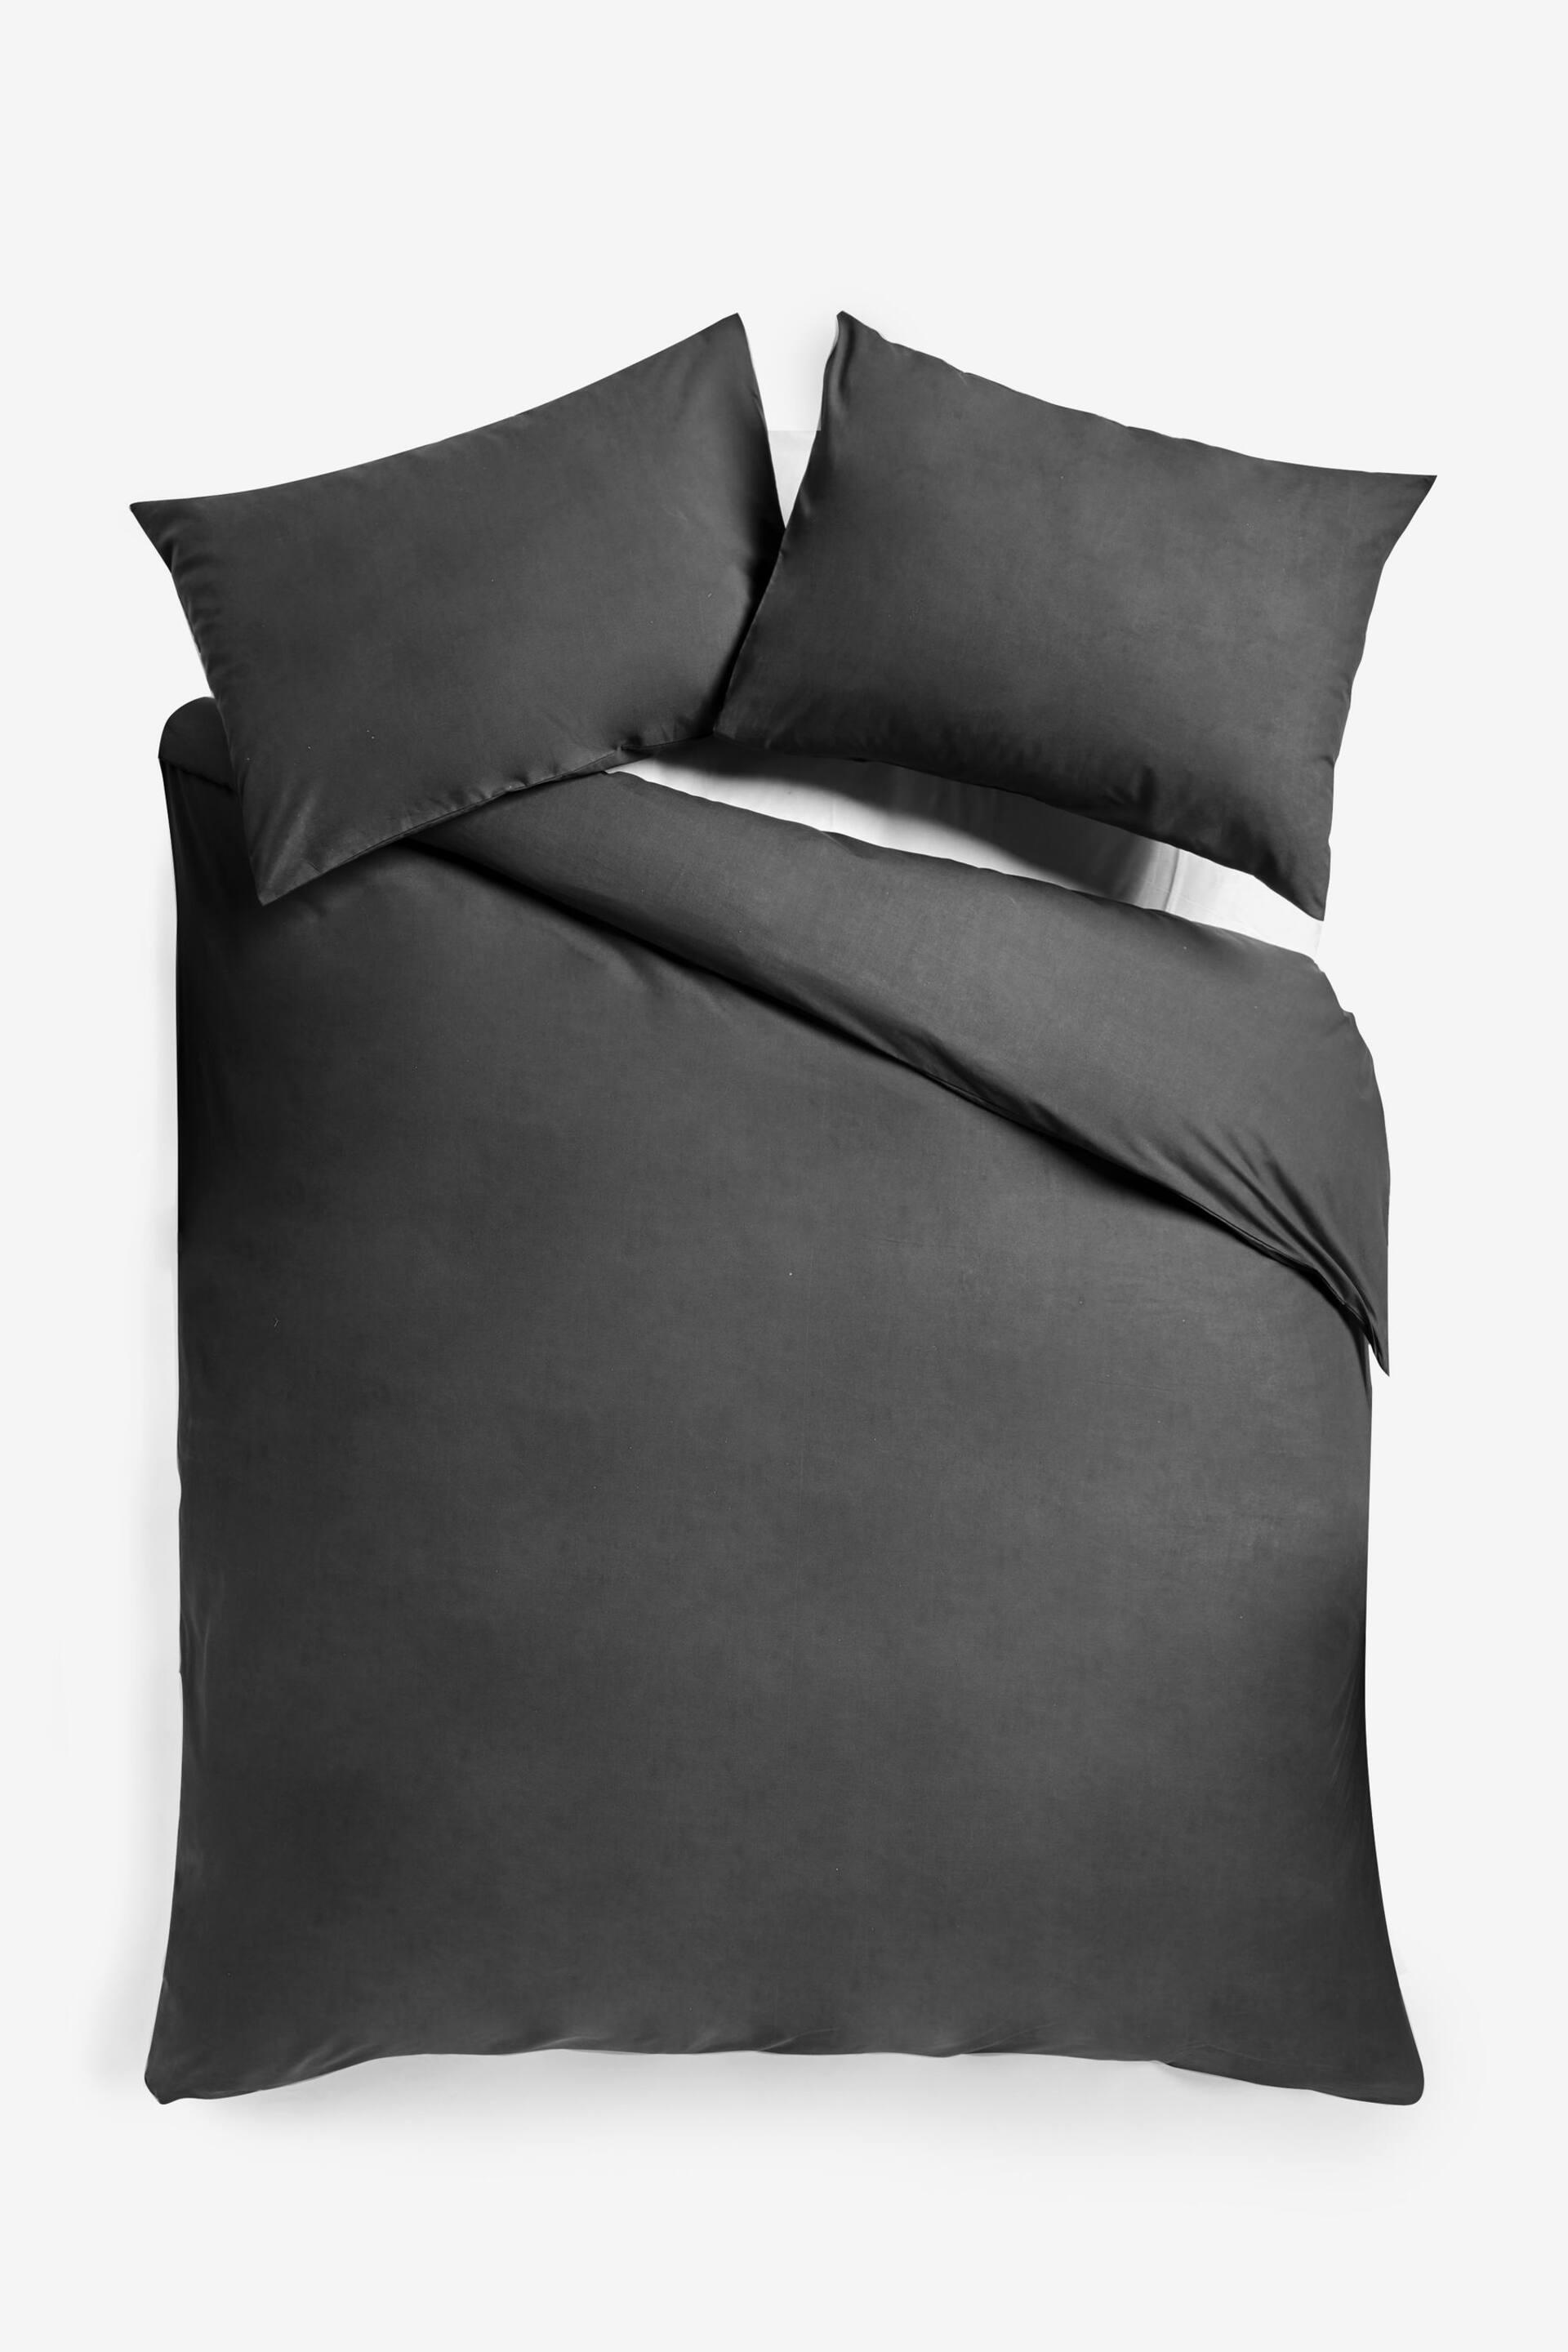 Charcoal Grey Easy Care Polycotton Plain Duvet Cover and Pillowcase Set - Image 4 of 6